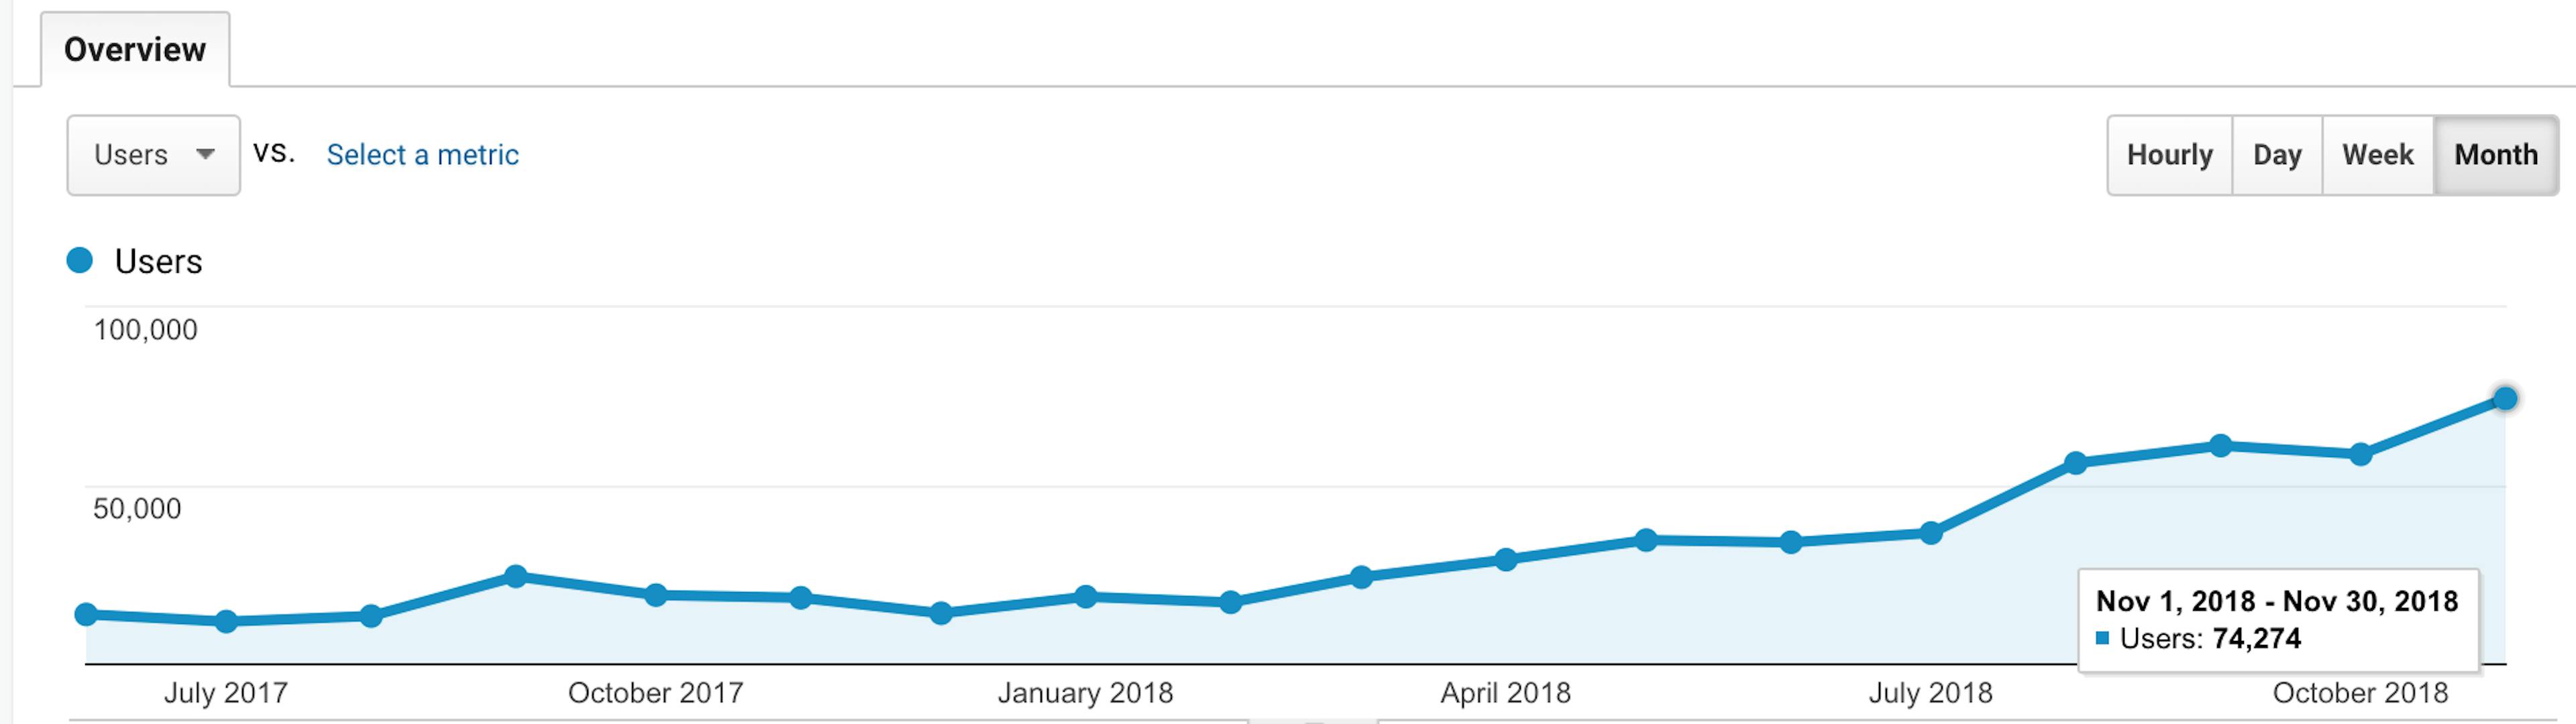 /how-we-grew-our-seo-to-70k-visitors-a-month-e6ea34ce1555 feature image